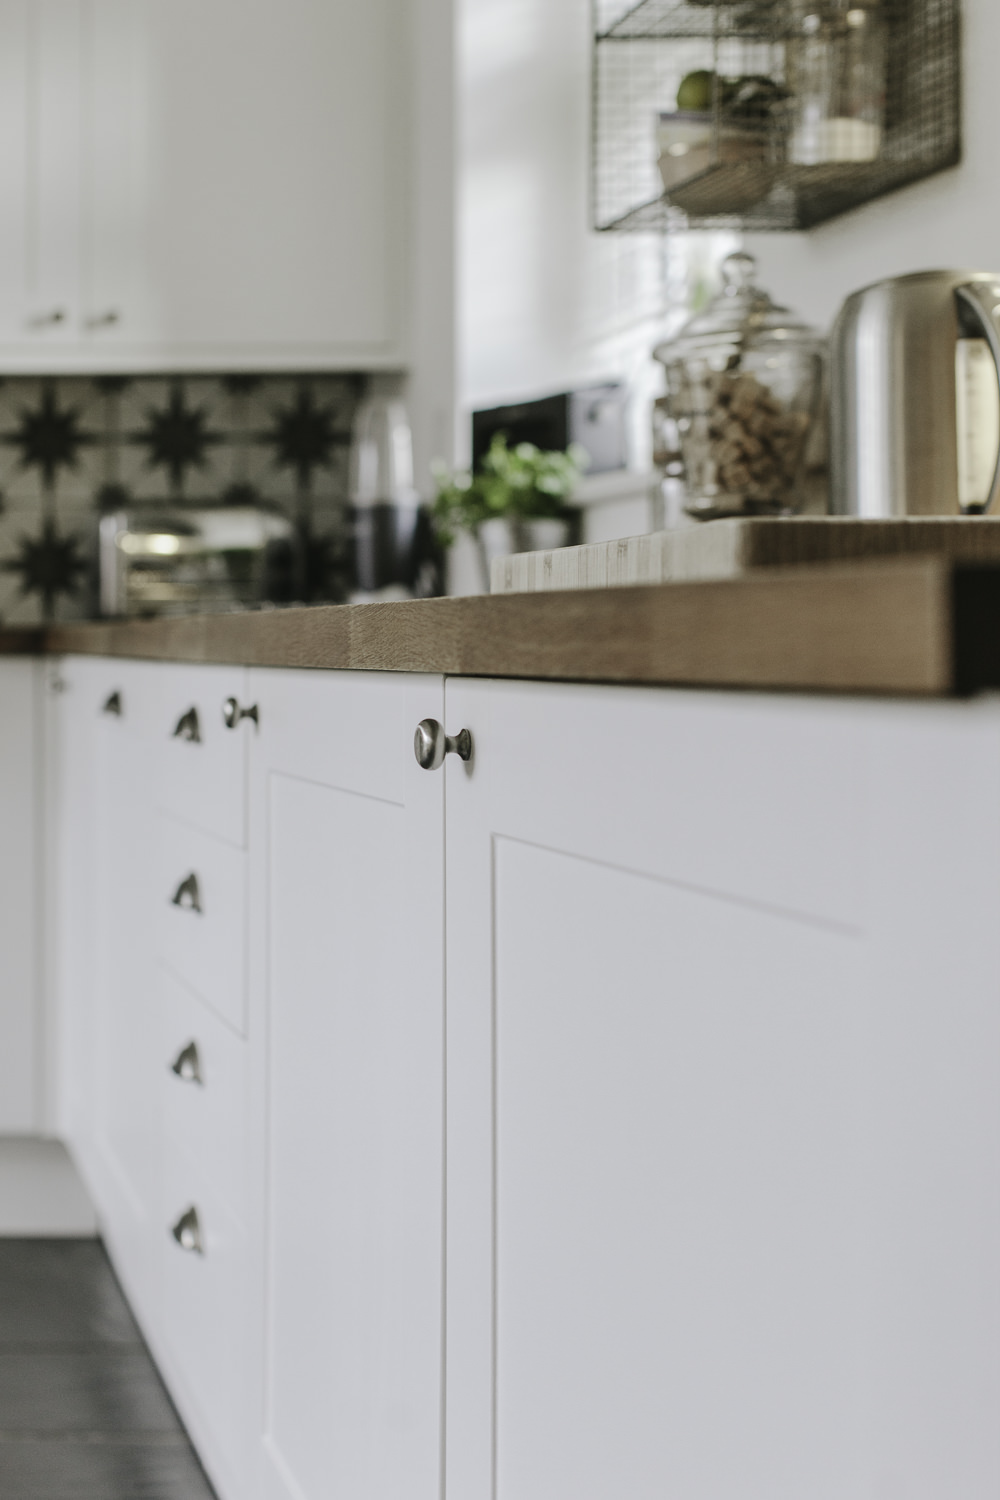 How To Paint Kitchen Cupboards Rock My Style Uk Daily Lifestyle Blog